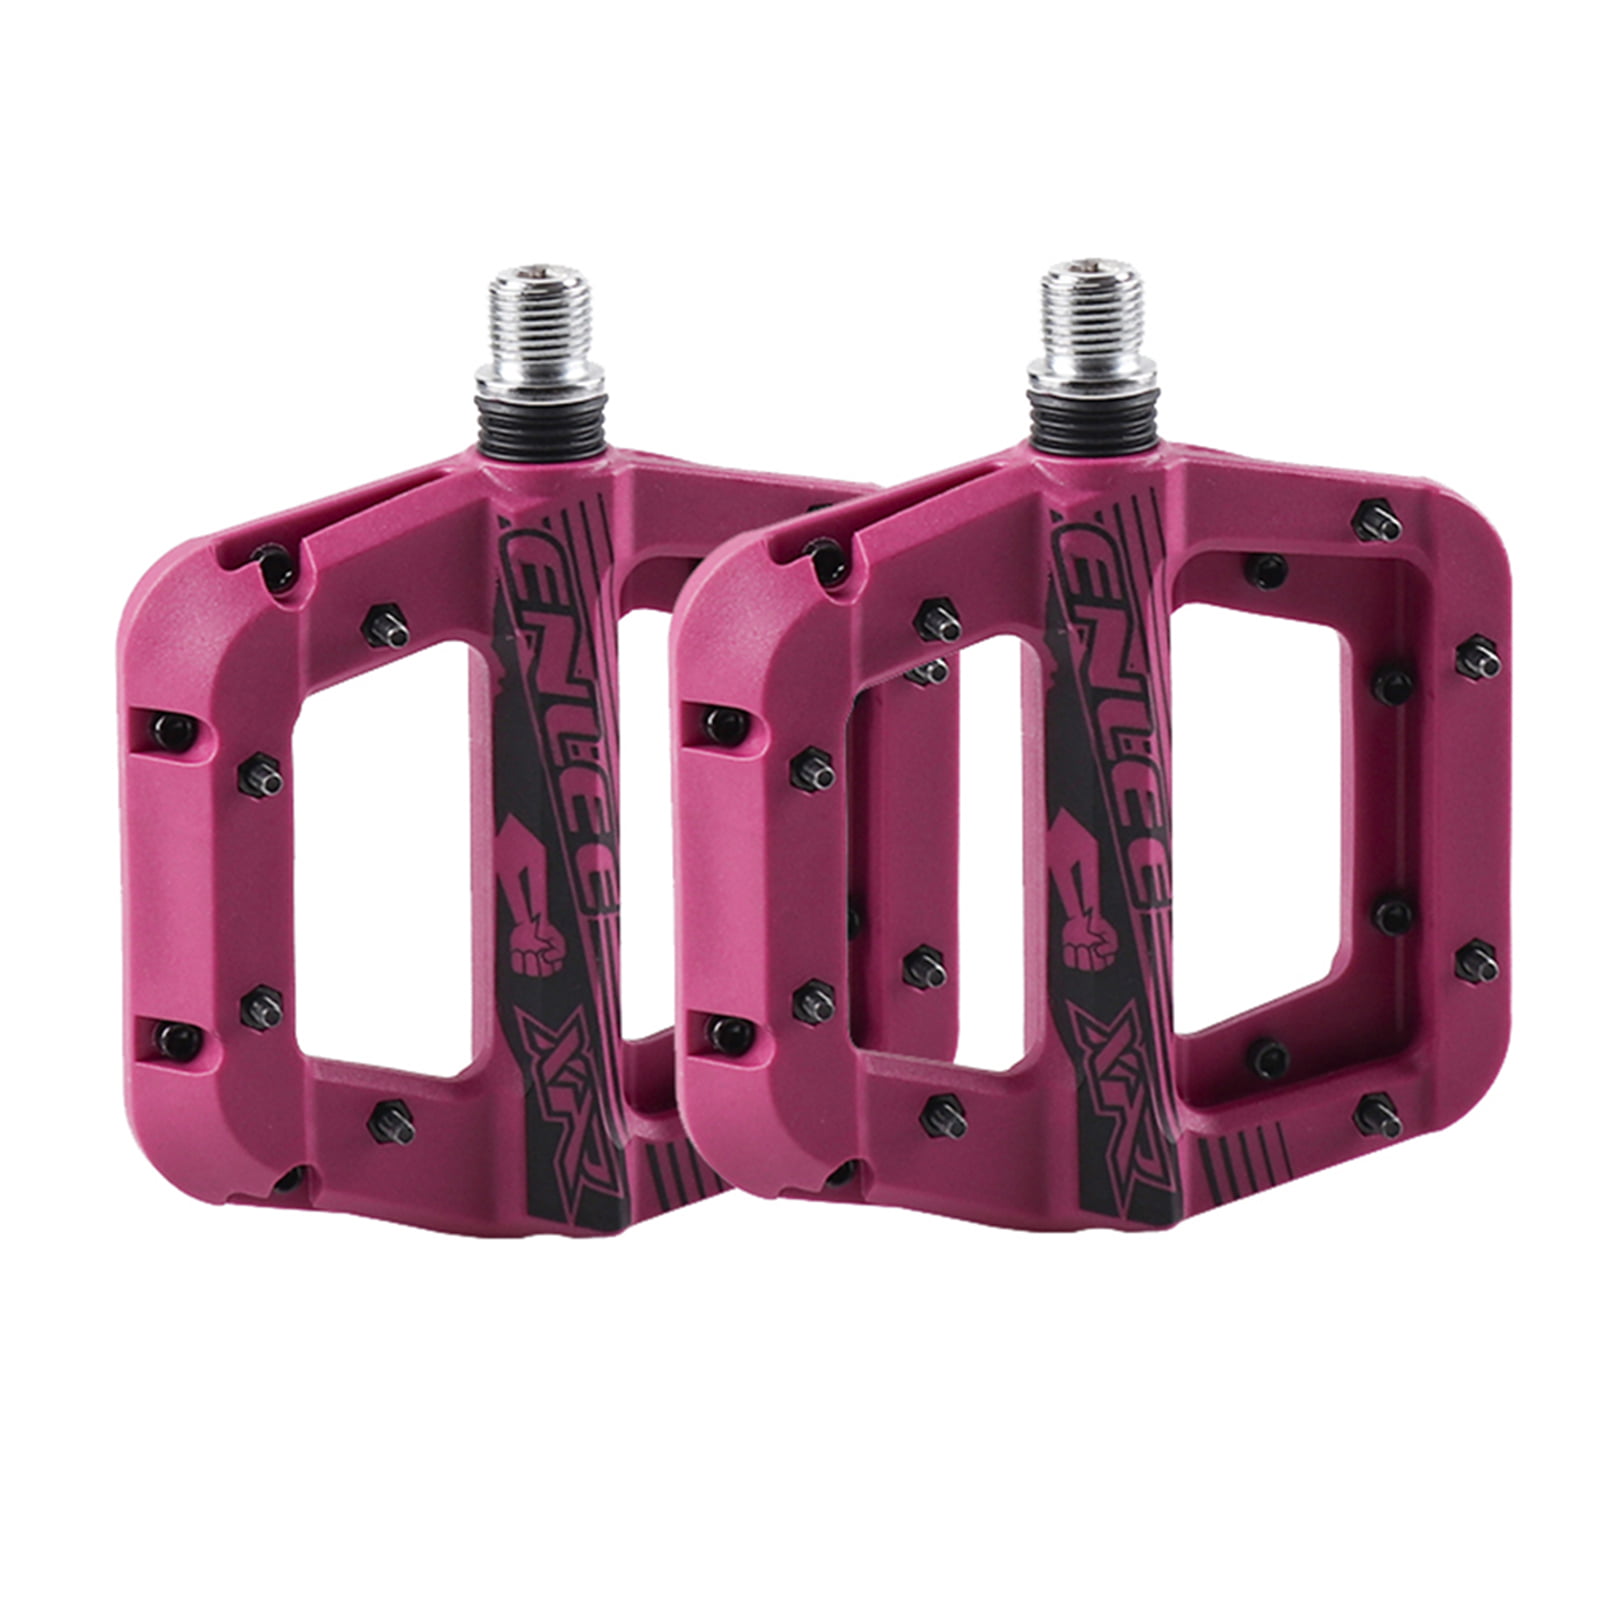 pink mountain bike pedals